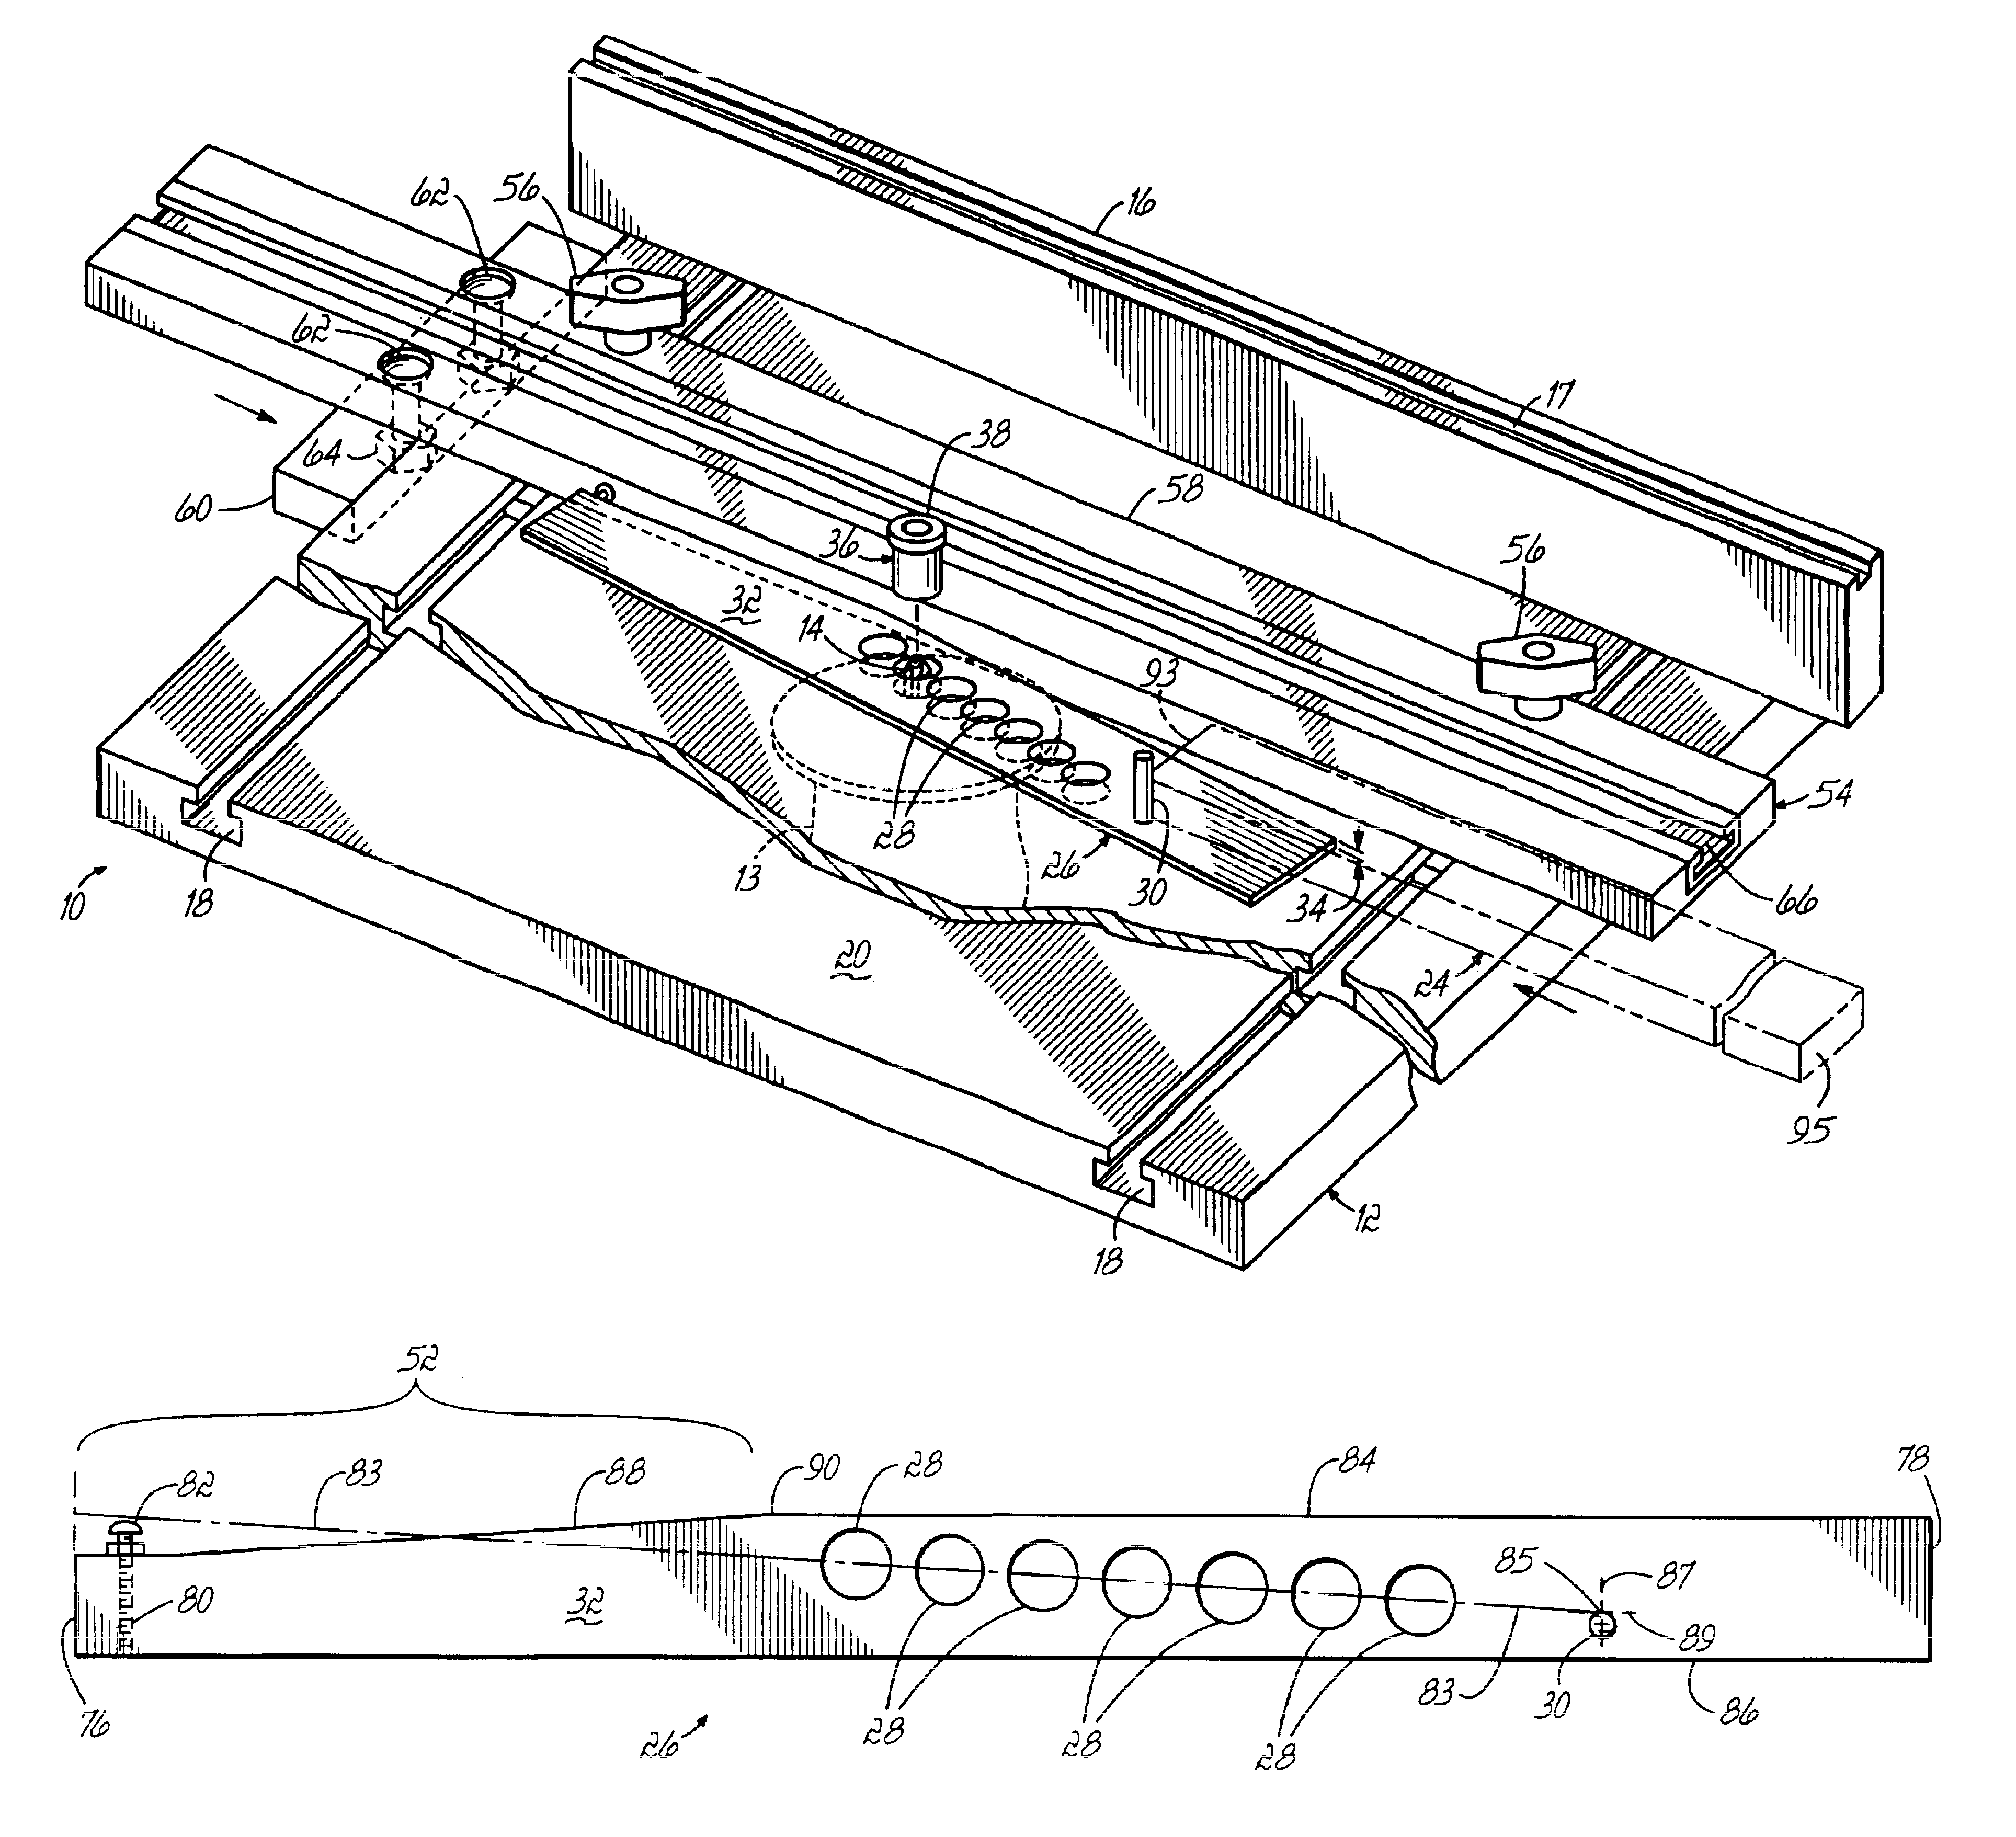 System for spacing flutes on a workpiece